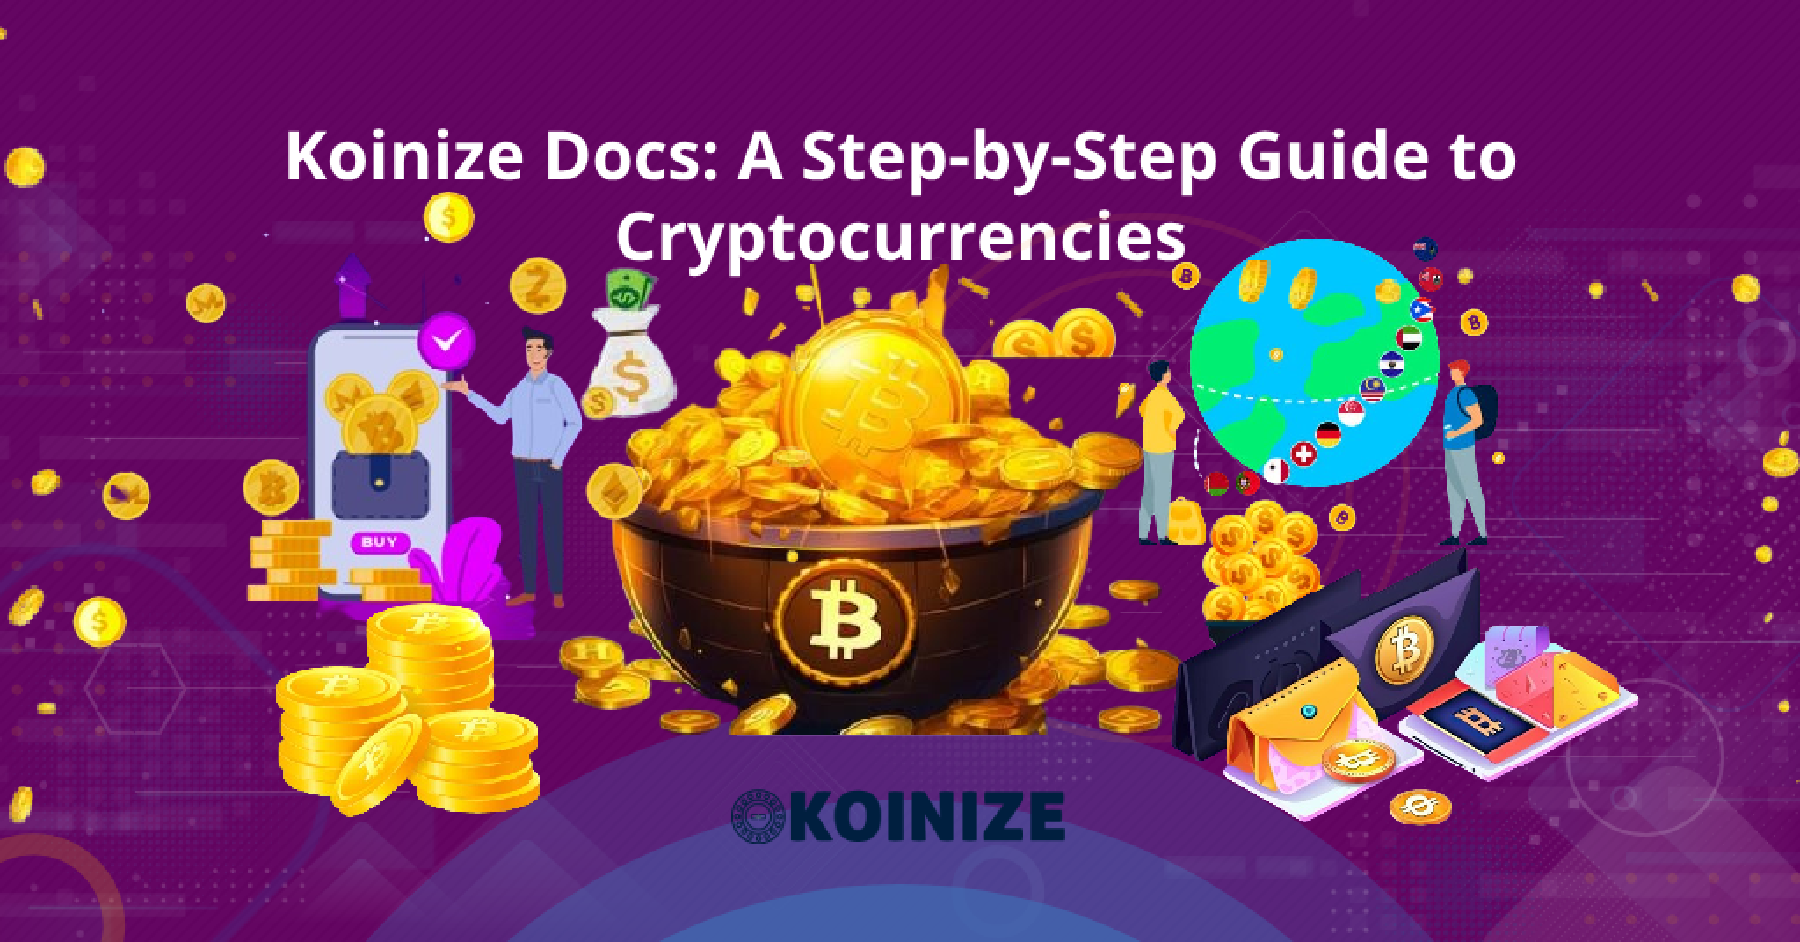 A Step-by-Step Guide to Cryptocurrencies